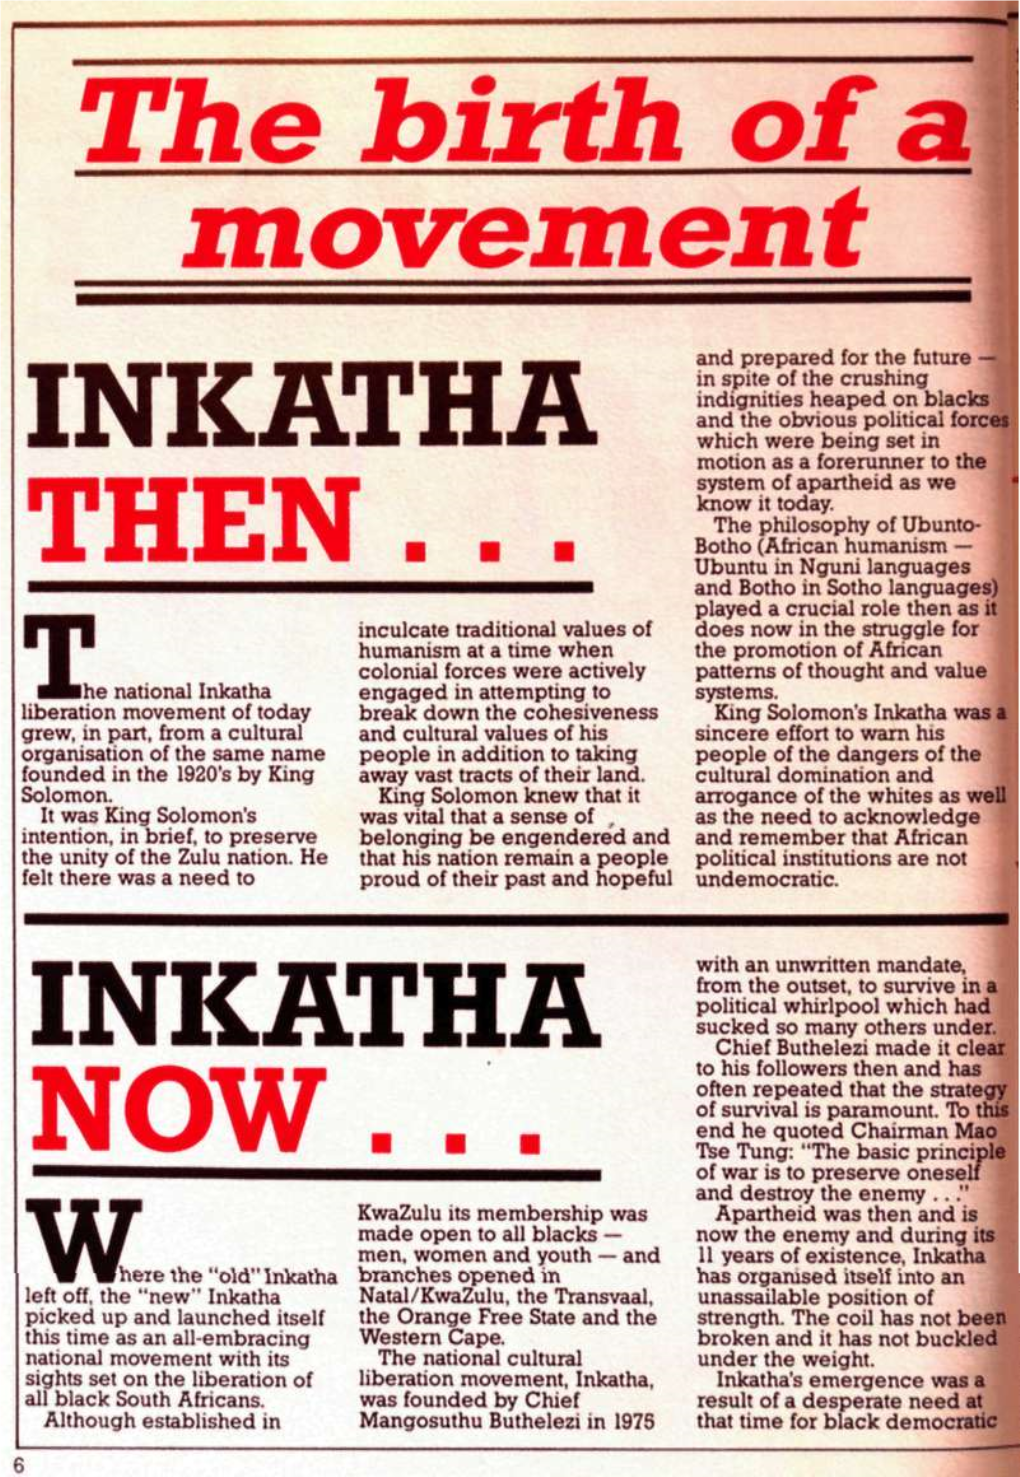 Ihe National Inkatha Liberation Movement of Today Grew, in Part